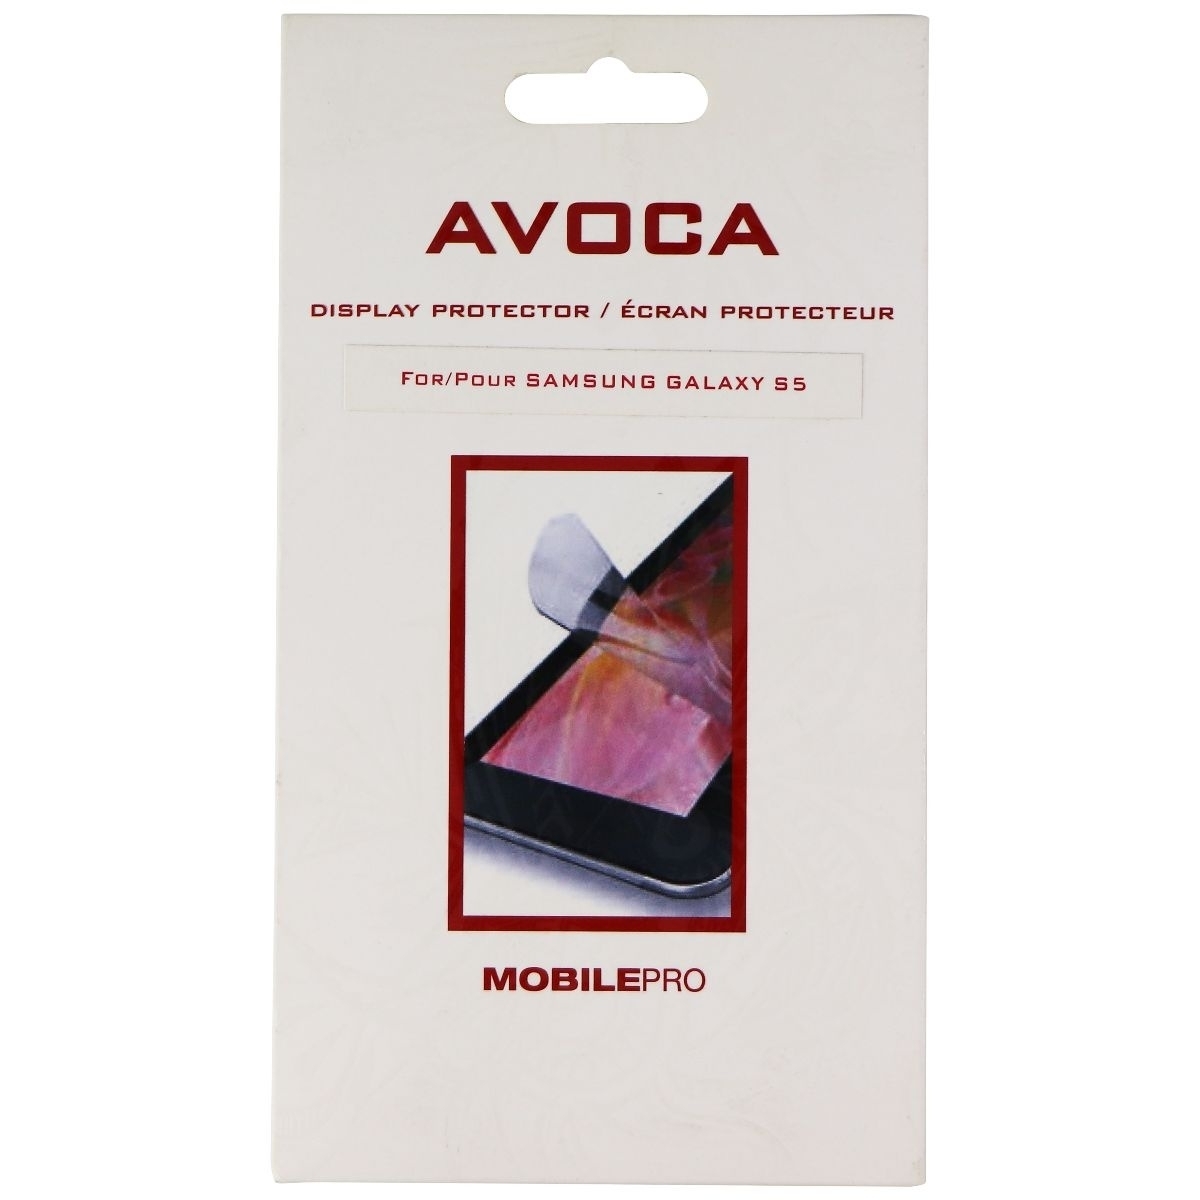 Avoca MobilePro Display Protector For Samsung Galaxy S5 Smartphone - Clear